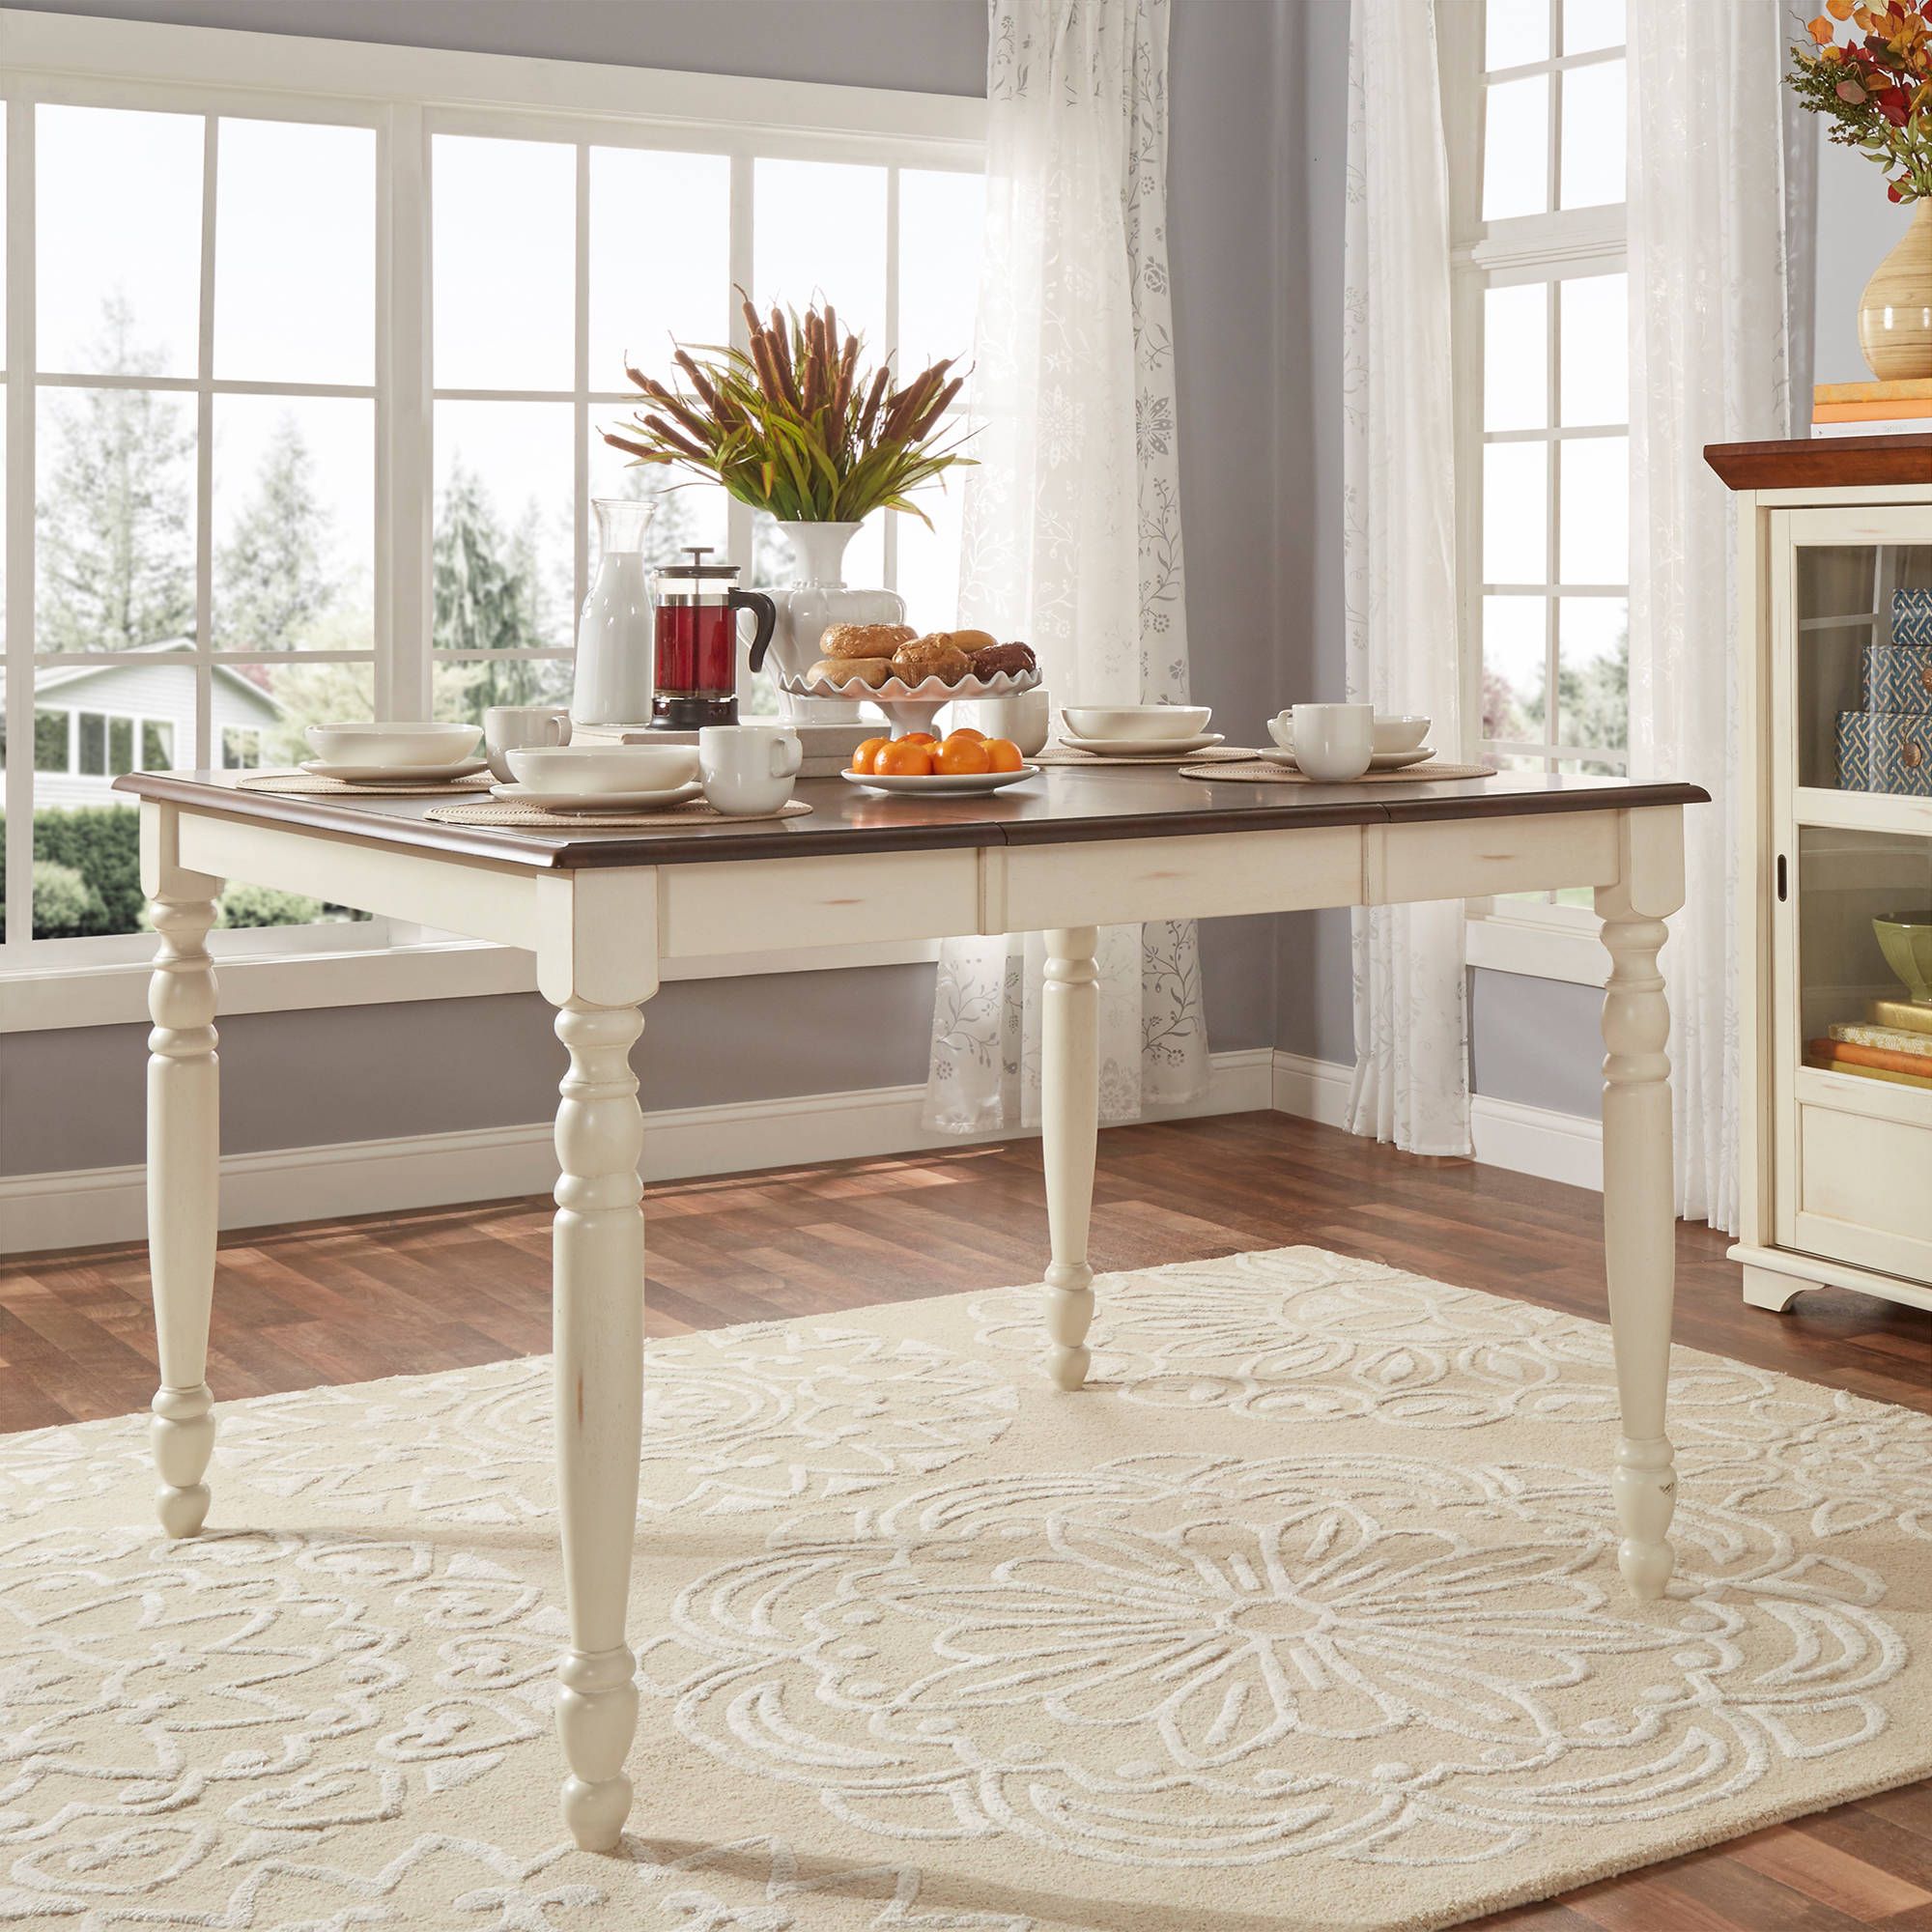 Weston Home Two Tone Counter Height Table, Antique White Throughout 2018 White Counter Height Dining Tables (View 14 of 15)